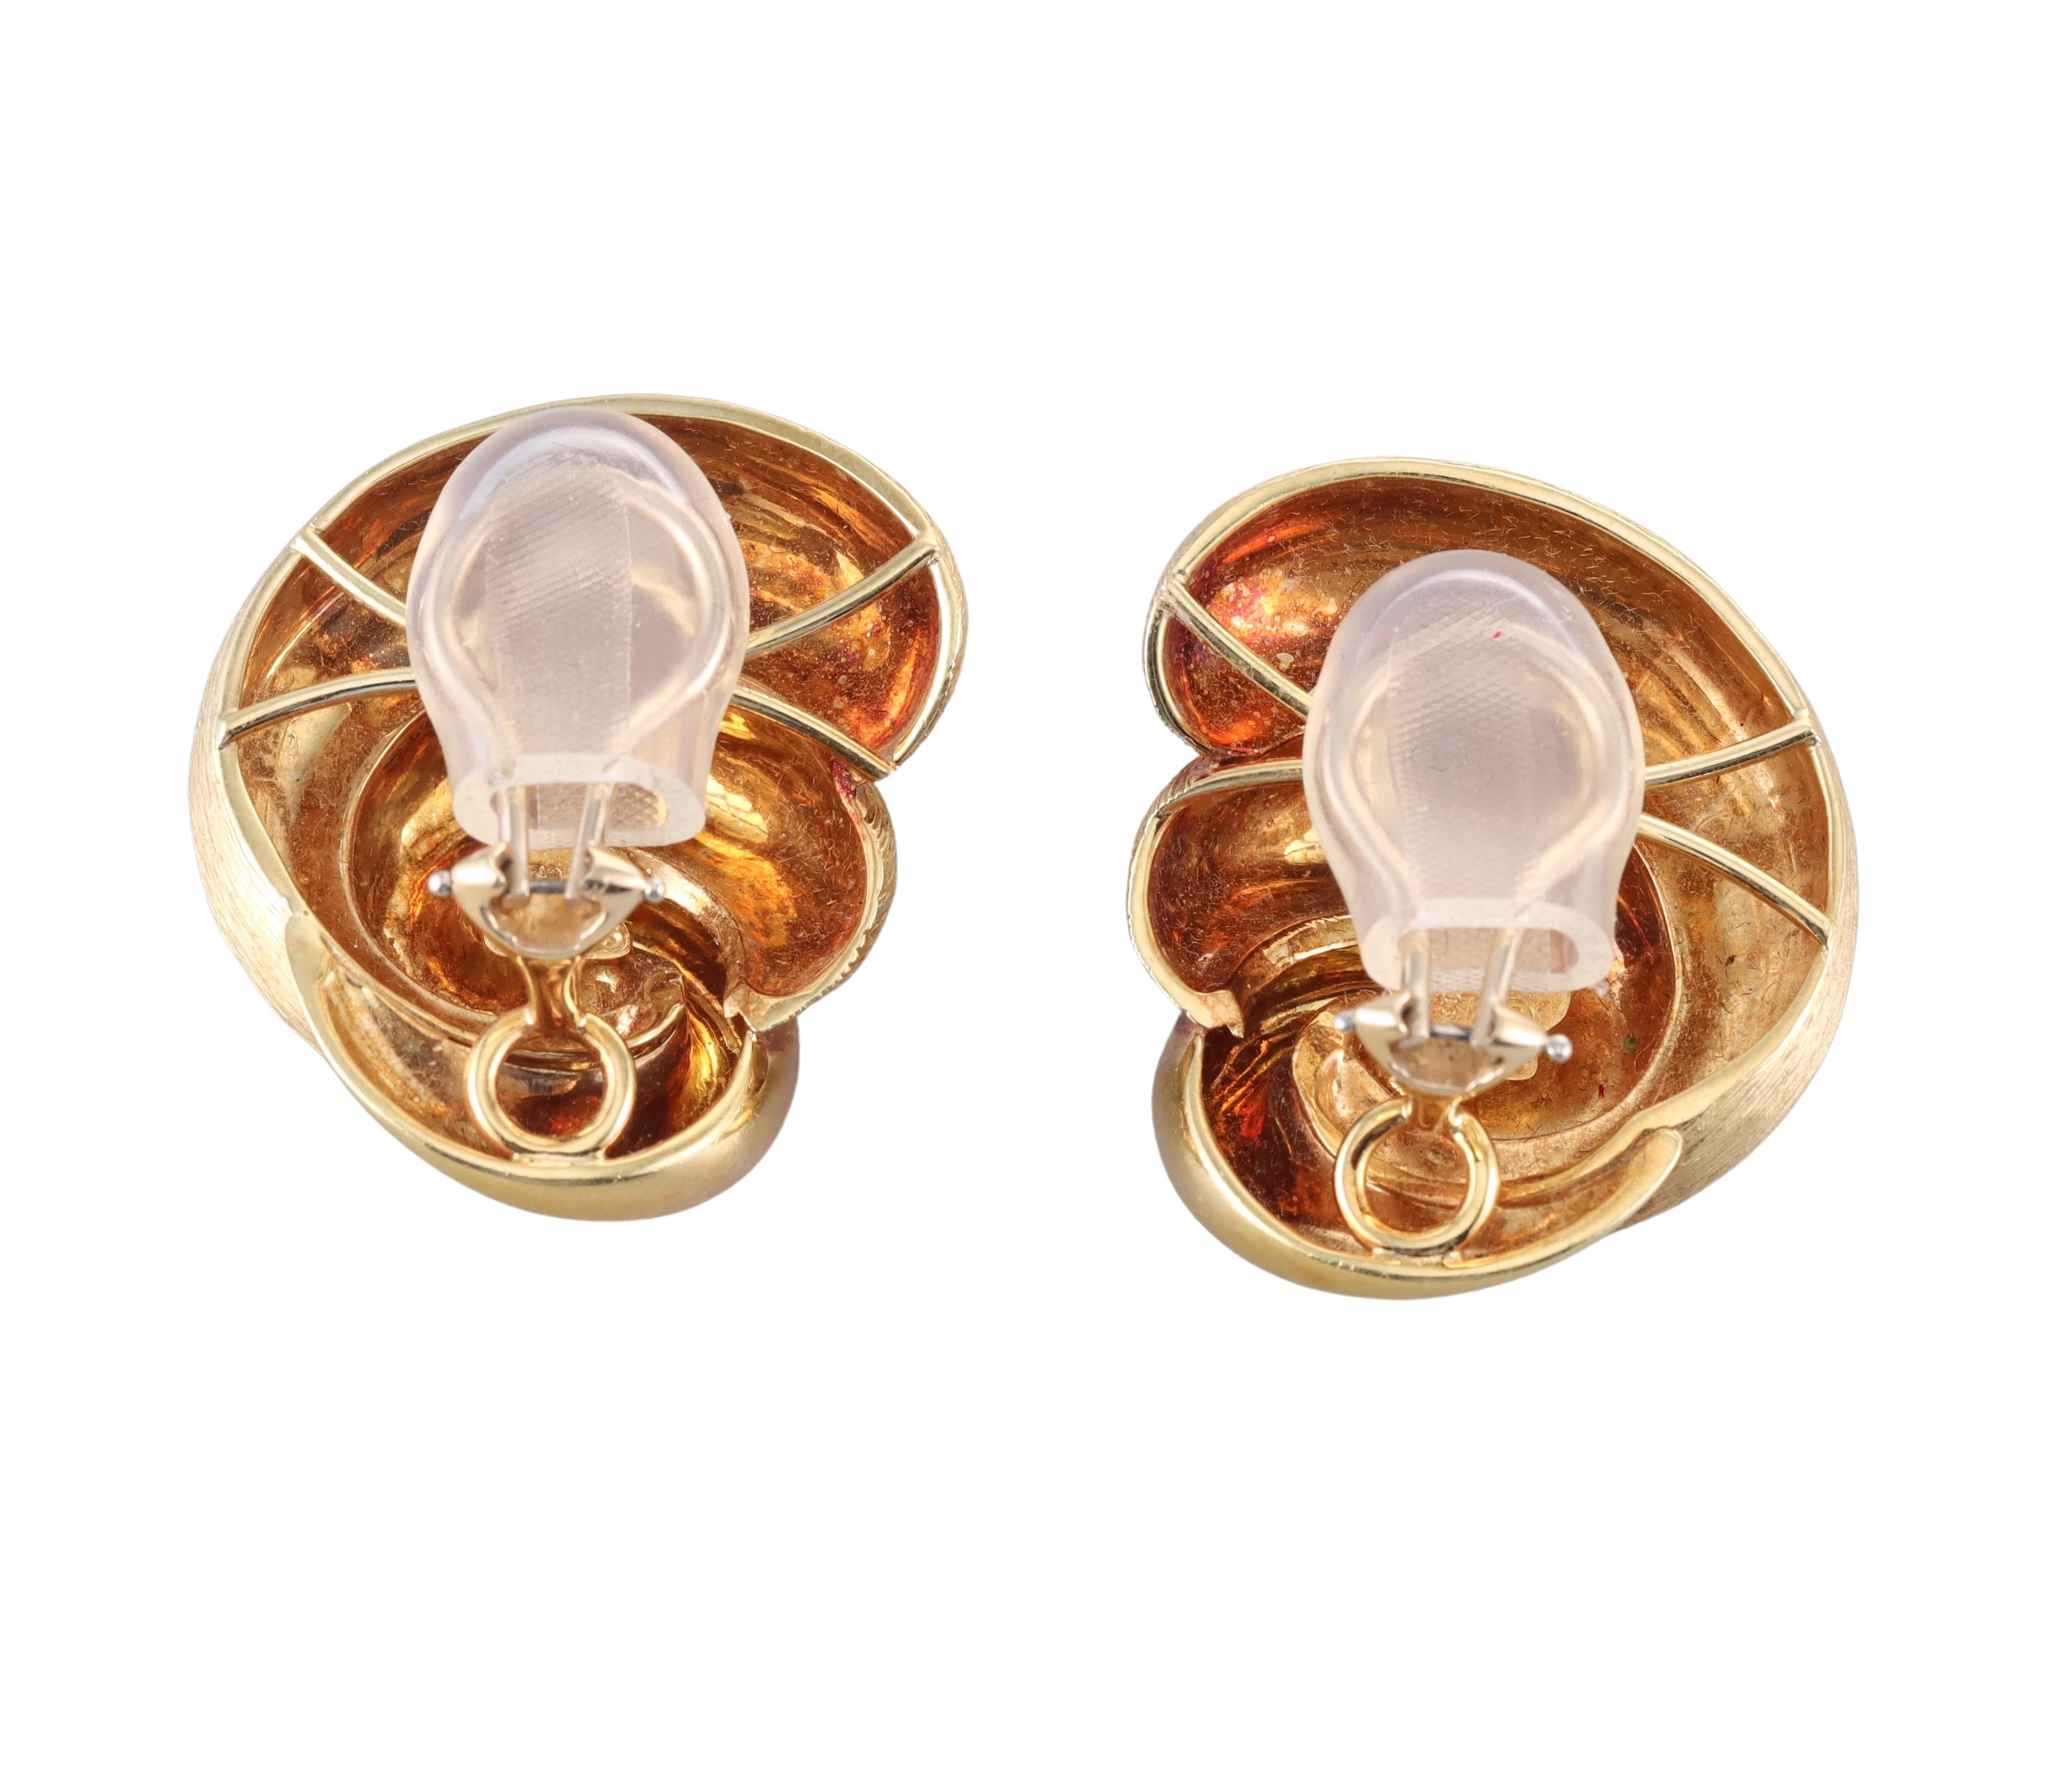 Pair of large 18k yellow gold earrings, featuring signature brushed and polished finish in a swirl design. The earrings measure 1.25